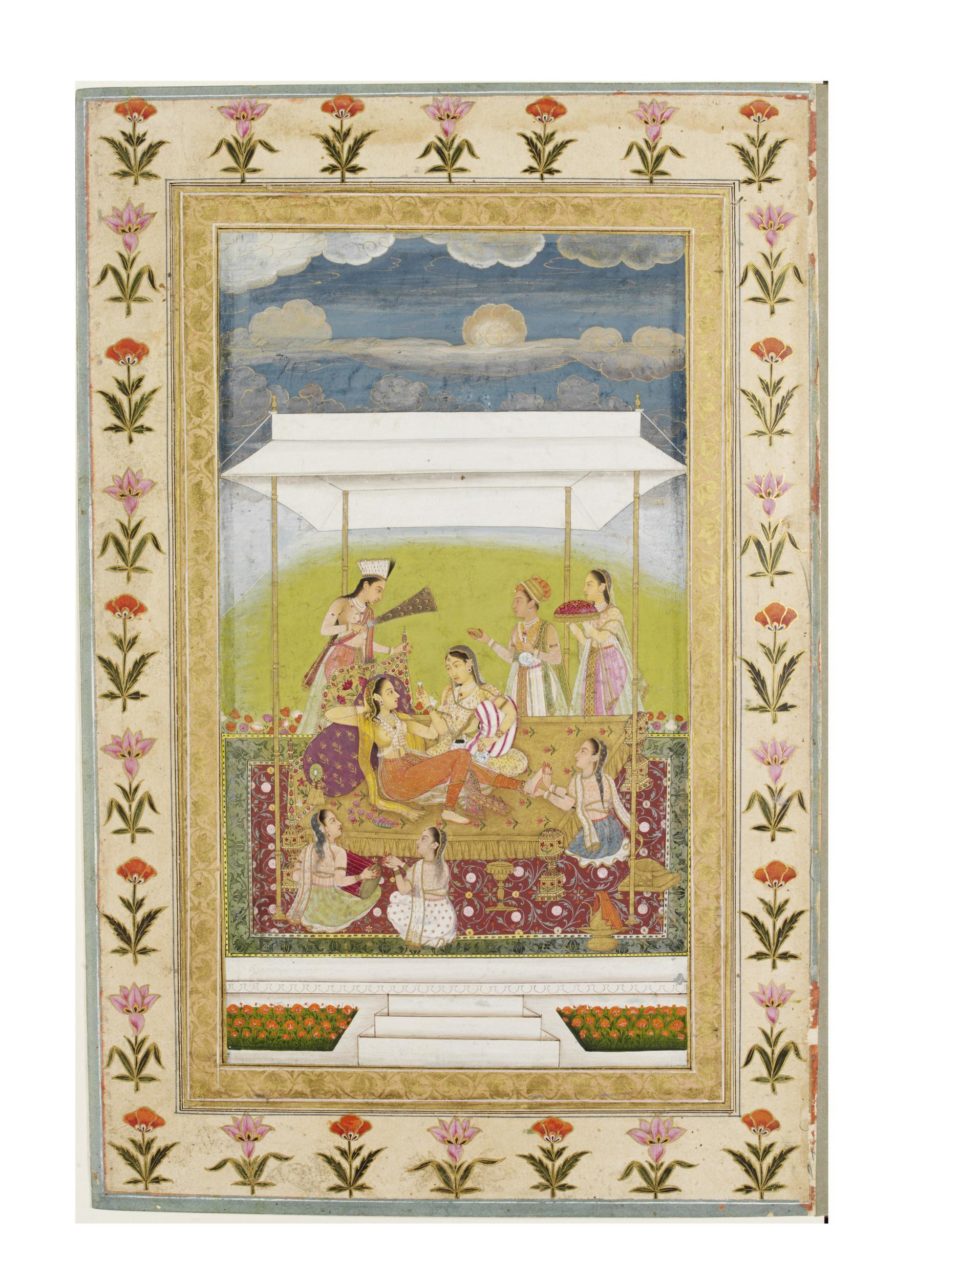 The principal lady wears a transparent, long-sleeved peshwaz (overdress) with a gold paned skirt under a high waist, above which there are double rows of pink-edged white lappets round the neck opening. She wears an orange paijama (trousers) with gold dotted and floral motifs and a golden patka ornamented with bands of pink, blue and pale orange flowers. Over her head and hanging down over her shoulders on either side she has a gauzy yellow, patterned dupatta (scarf) edged in gold